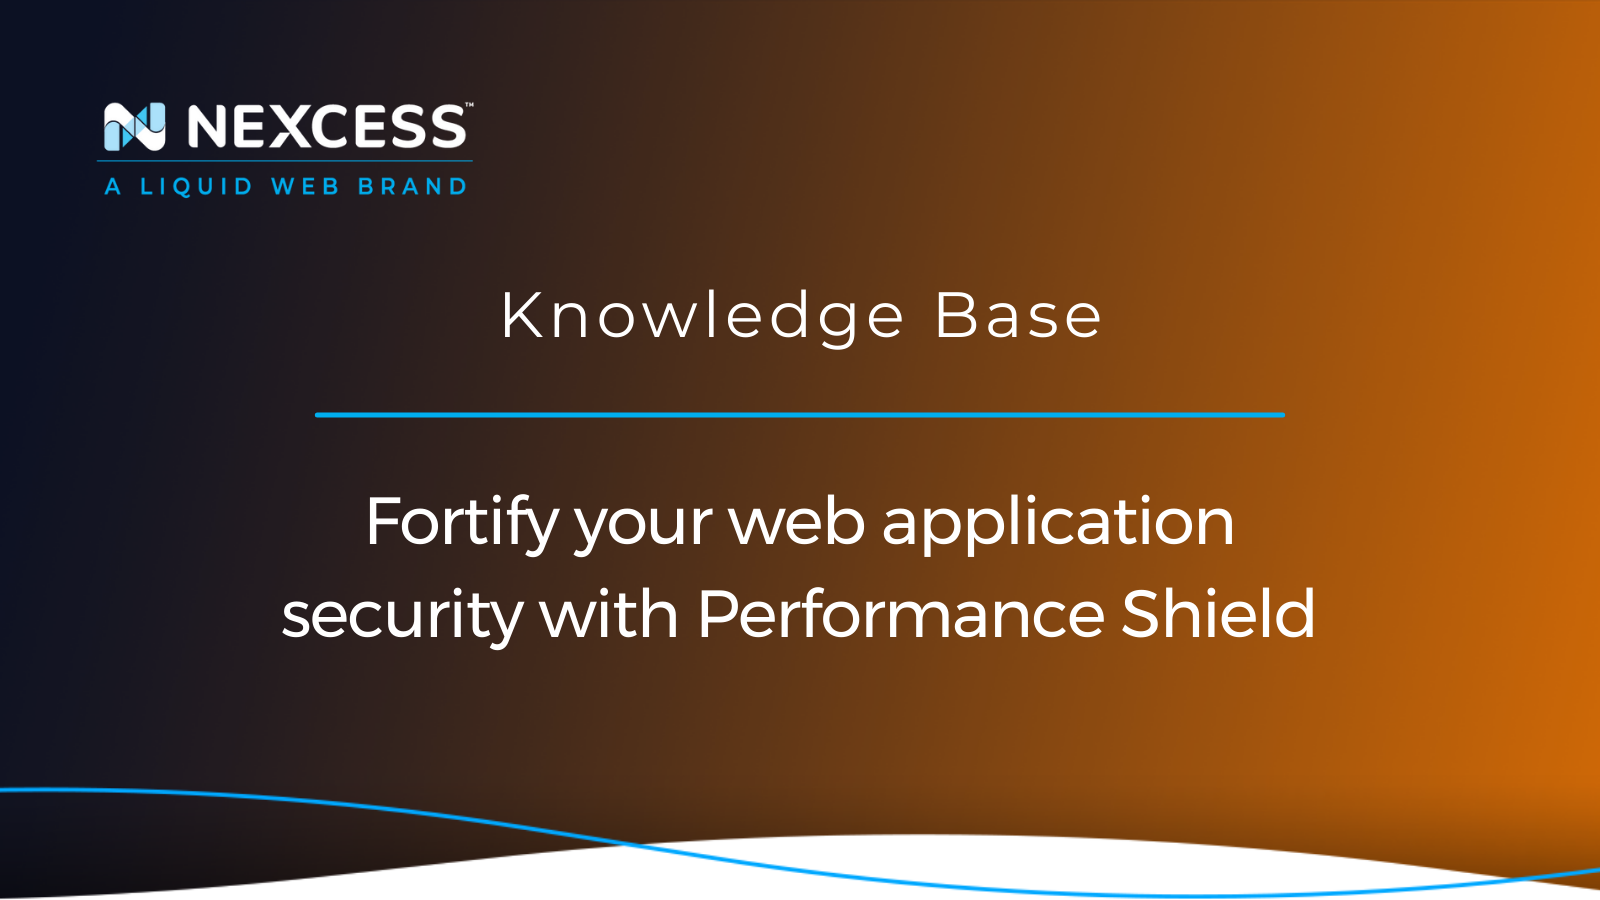 Fortify your web application security with Performance Shield